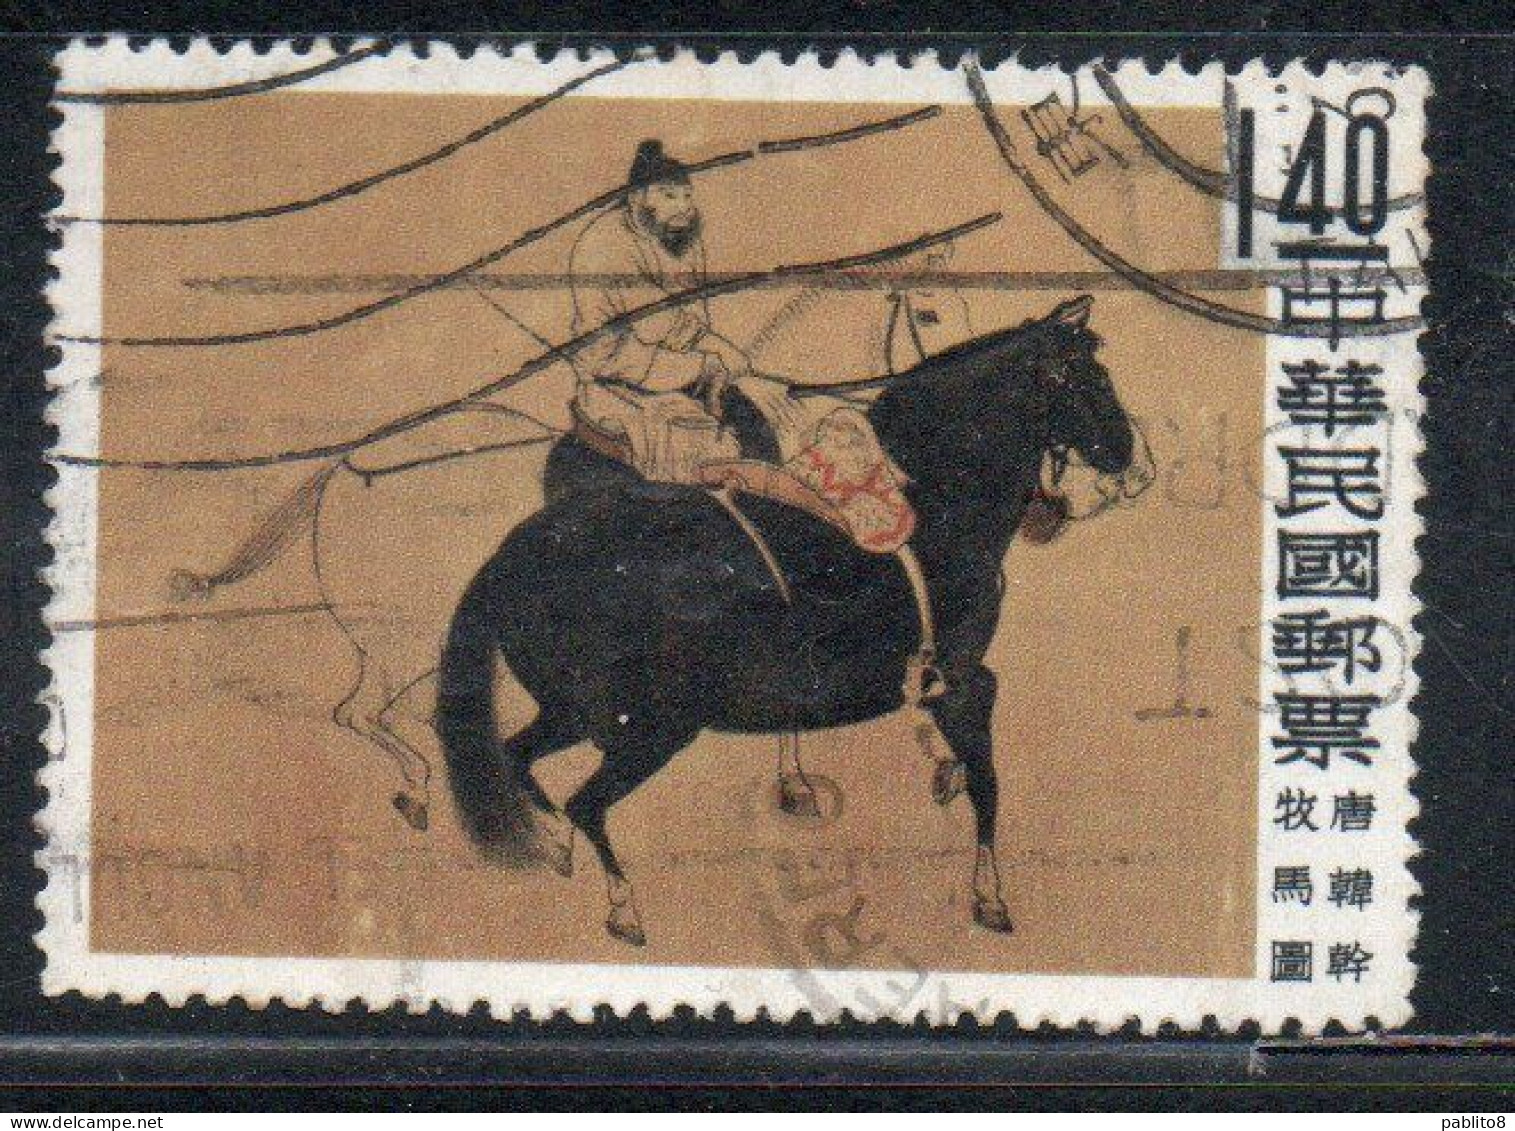 CHINA REPUBLIC CINA TAIWAN FORMOSA 1960 CHINESE PAINTINGS TWO HORSES AND GROOM BYHAN KAN 1.40$ USED USATO OBLITERE' - Gebraucht